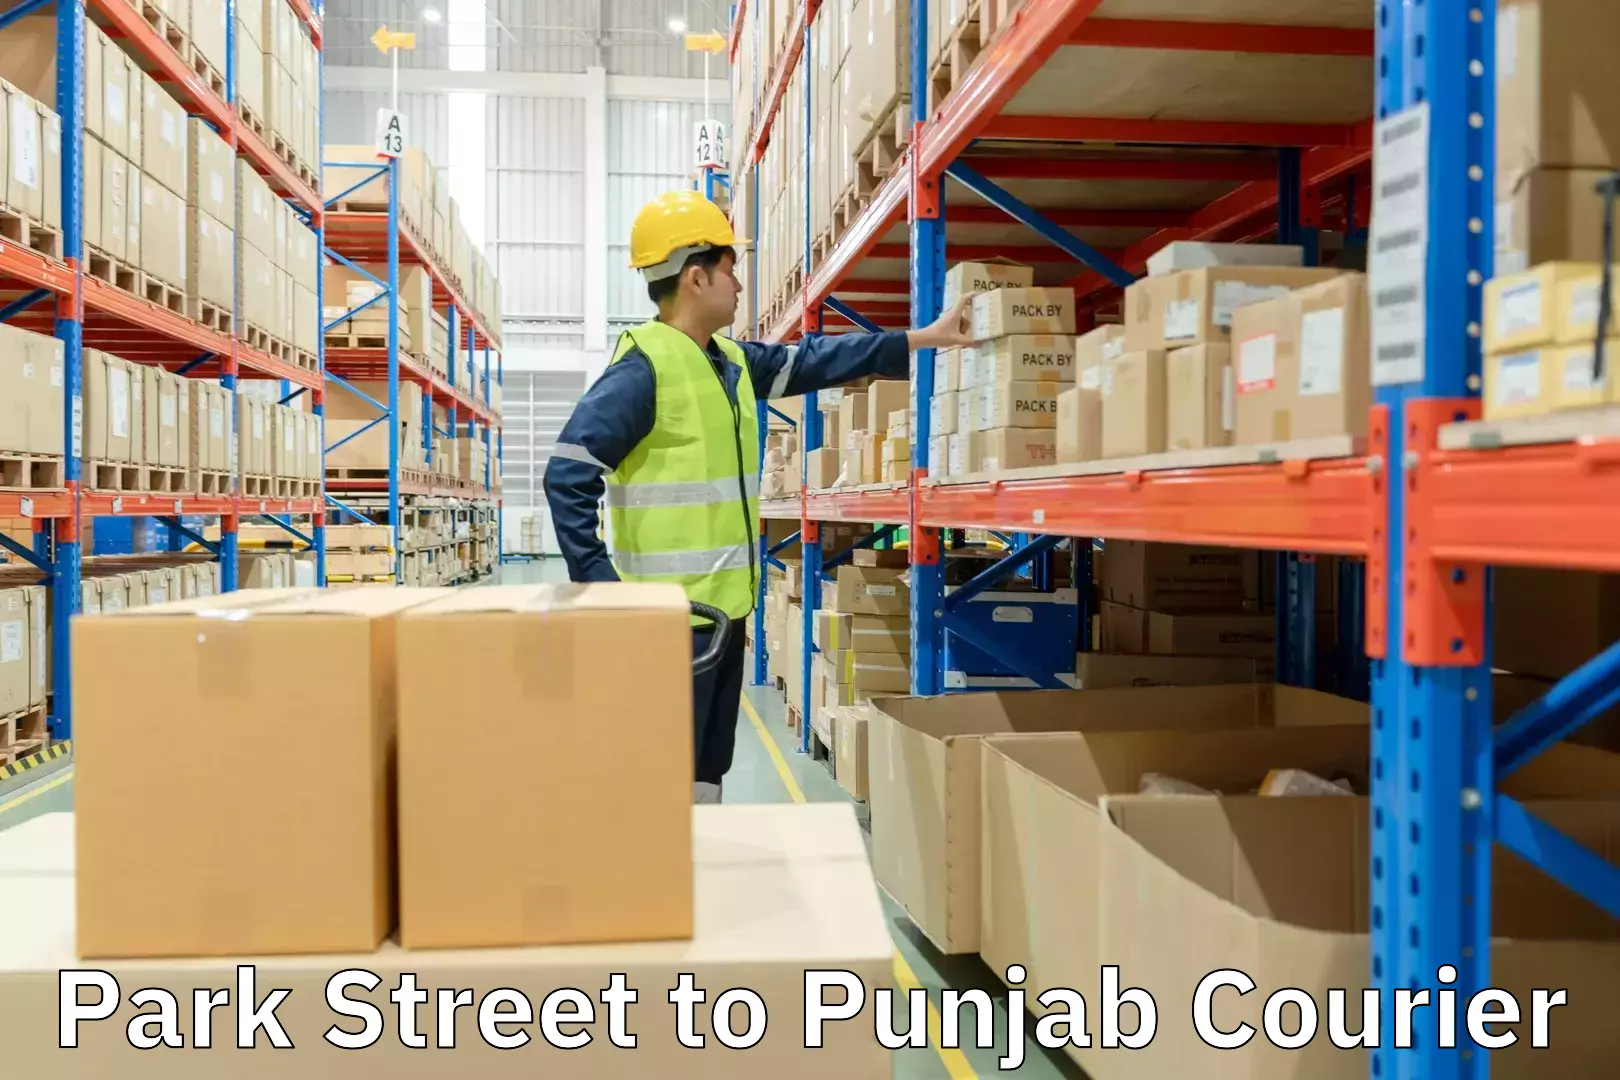 Next day courier in Park Street to Punjab